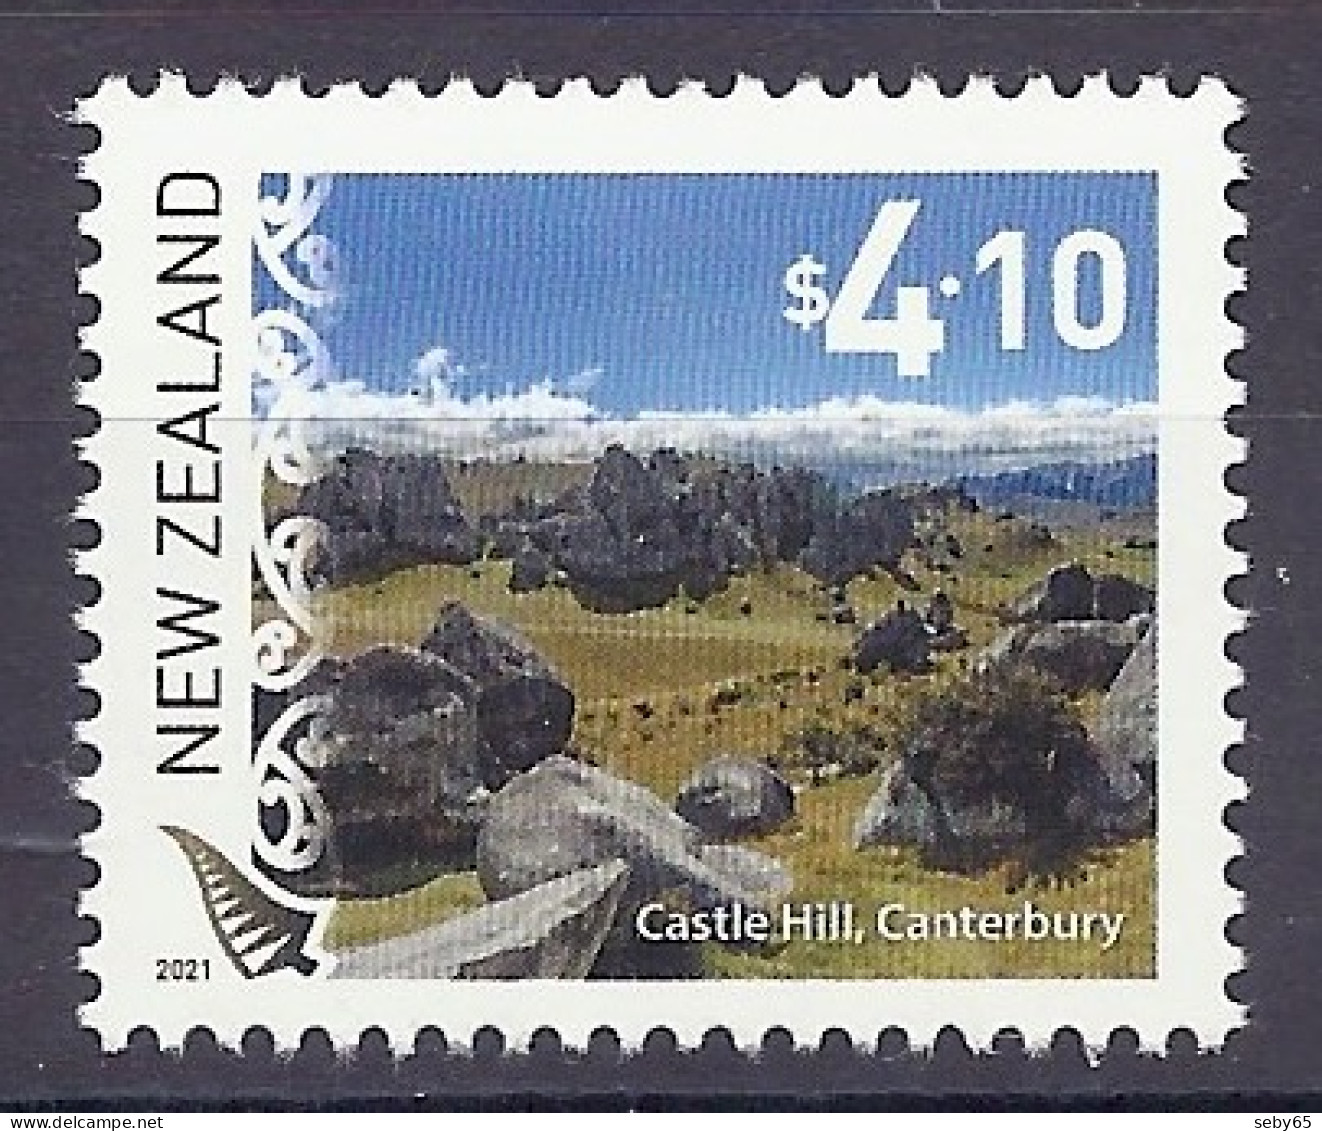 New Zealand 2021 - Definitives, Castle Hill, Canterbury, Scenic Views, Scenery, Mountains, Rocks, Landscapes - MNH - Unused Stamps